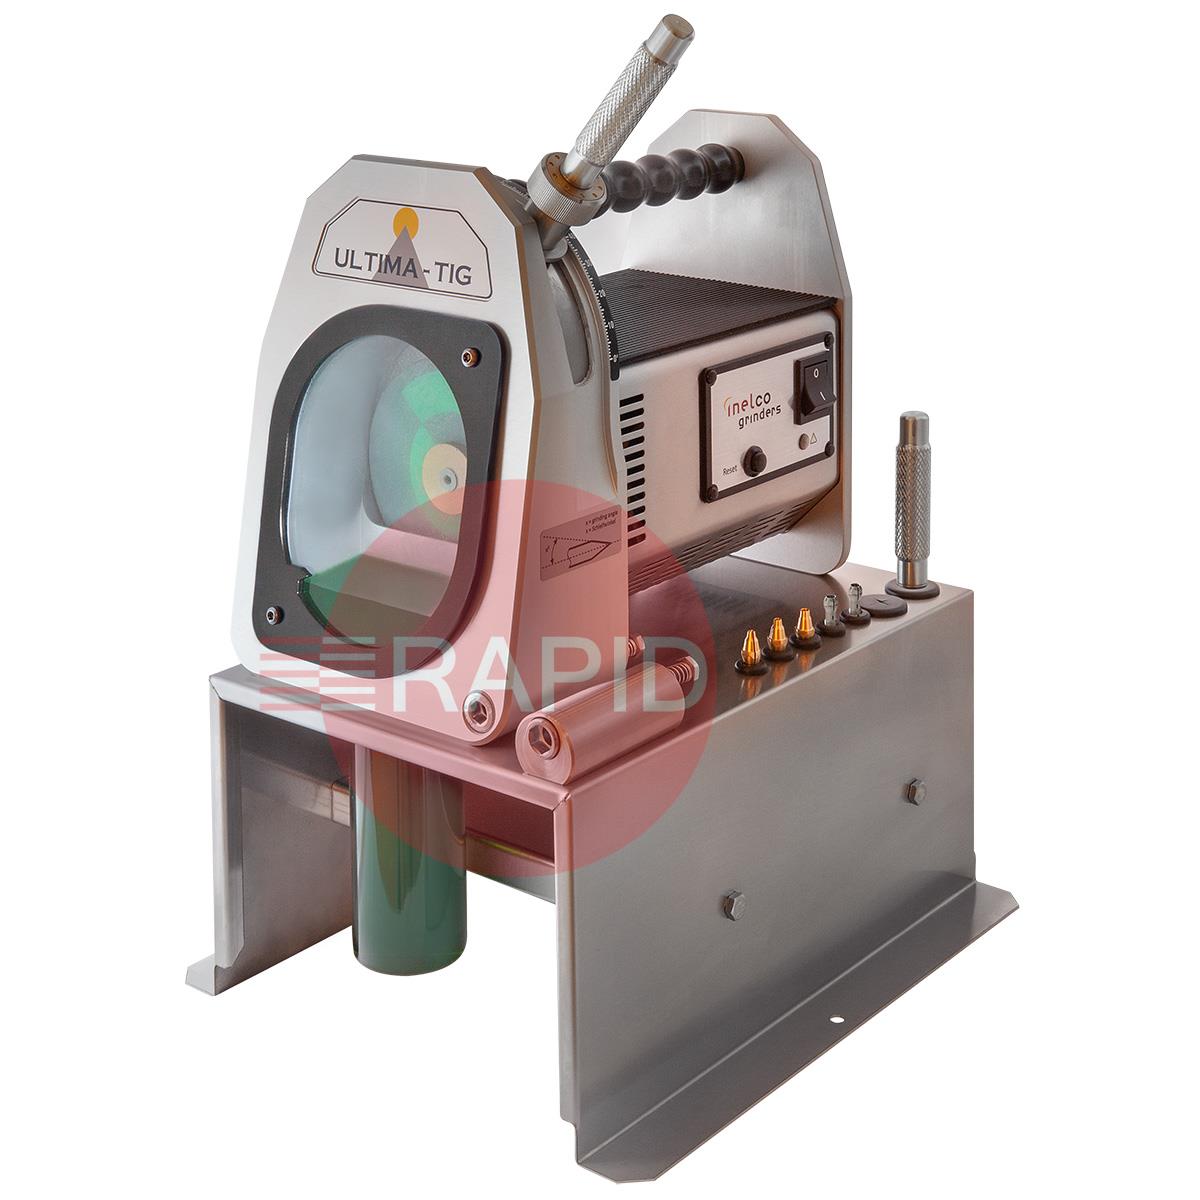 8889742  Ultima-Tig-S Tungsten Grinder (Up to Ø 8mm). Wet Cutting System Supplied with Grinding Liquid